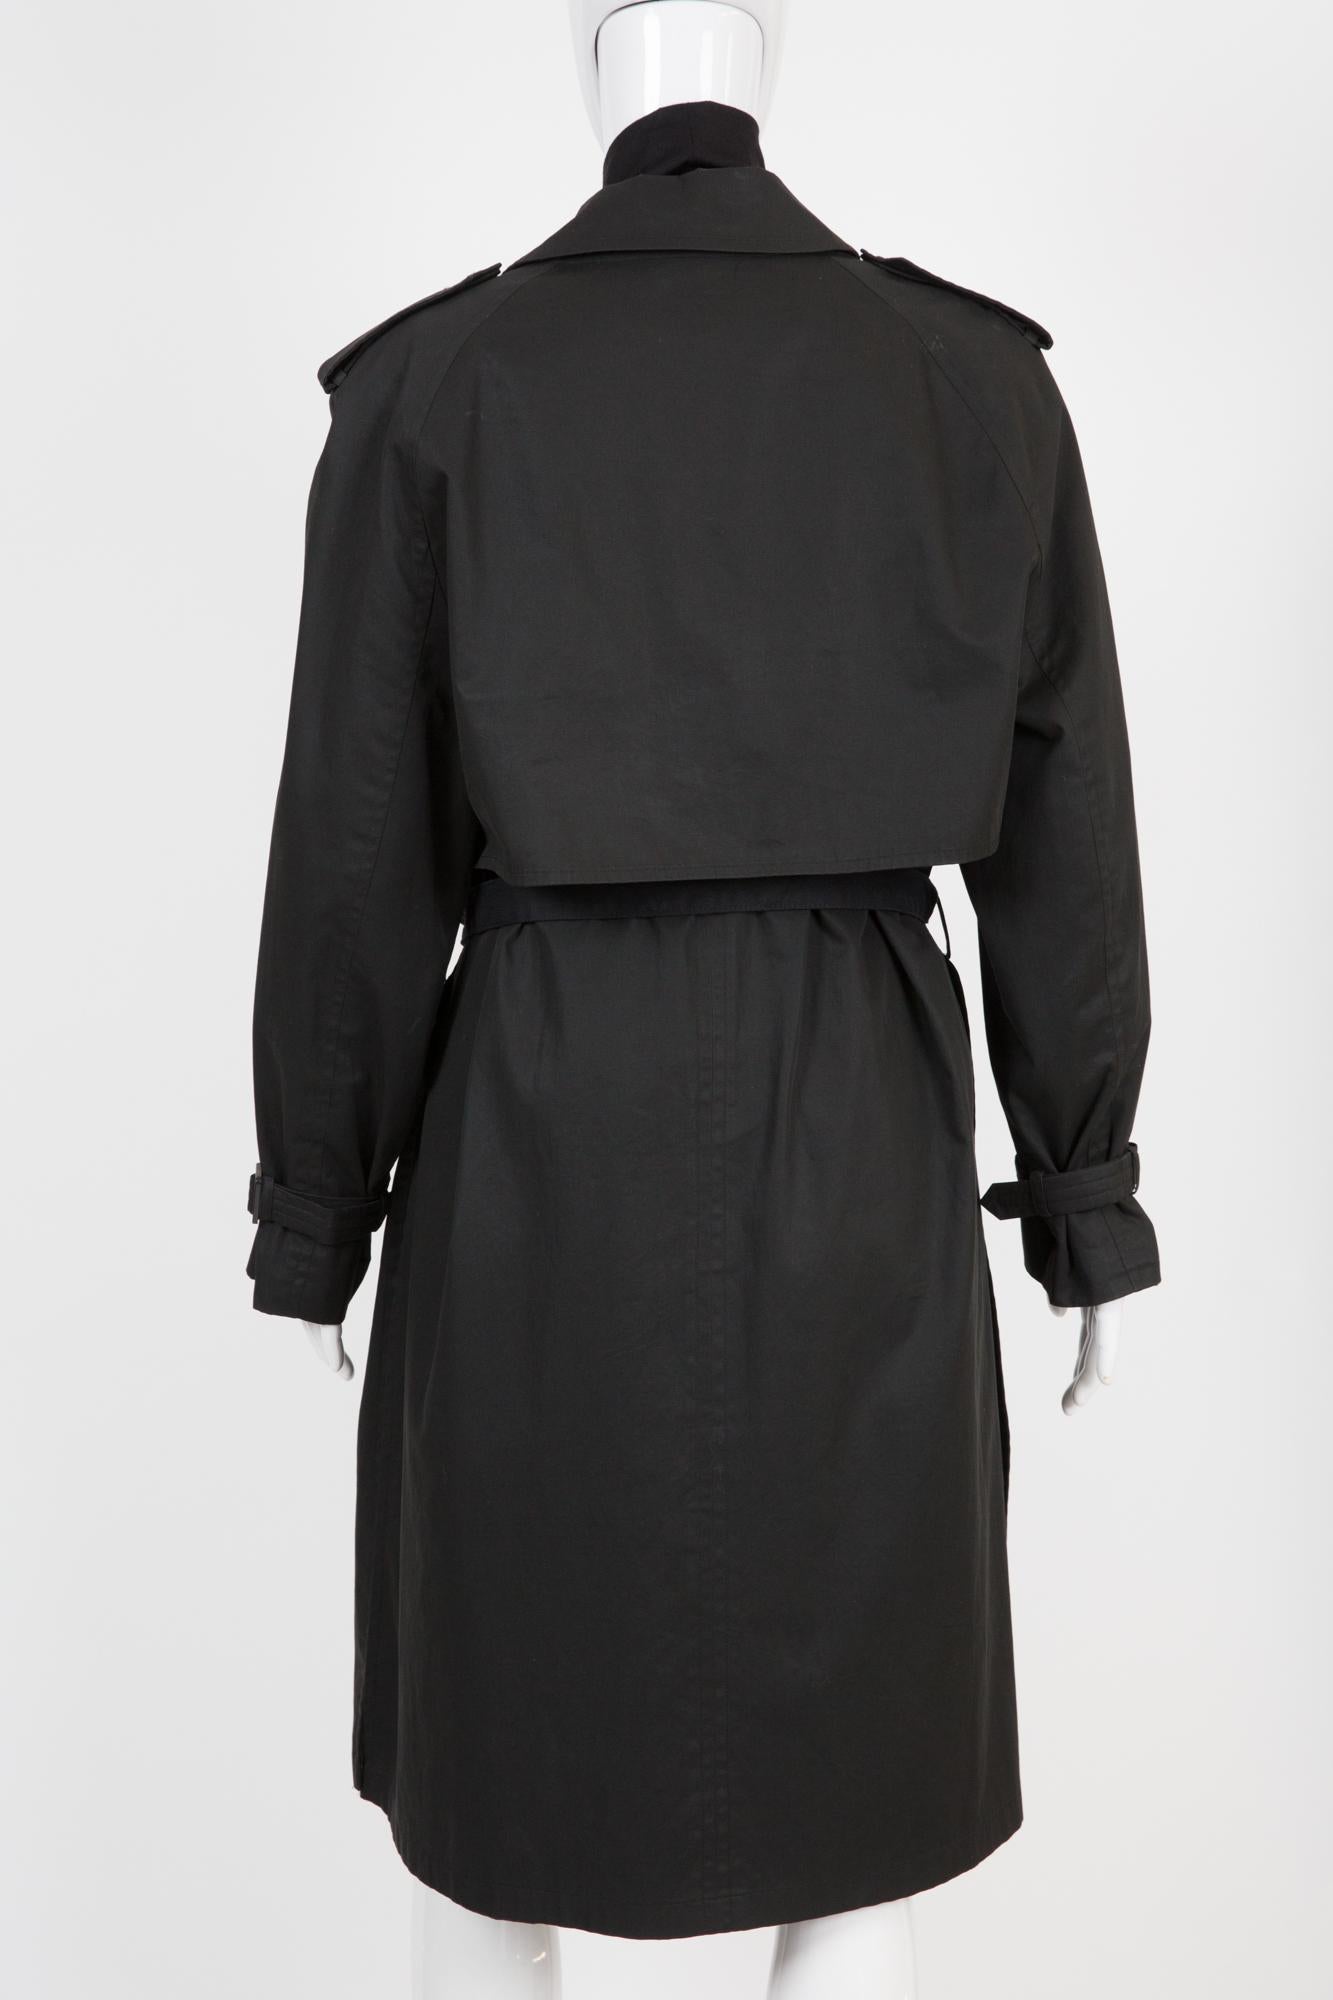 Hermes by Martin Margiela black trench coat featuring a black gabardine flared trench coat, slits detailing at sides, detachable cape and sleeves at back and a seperated belt. (see attached image Margiela book)
Circa Summer 2003
In good vintage